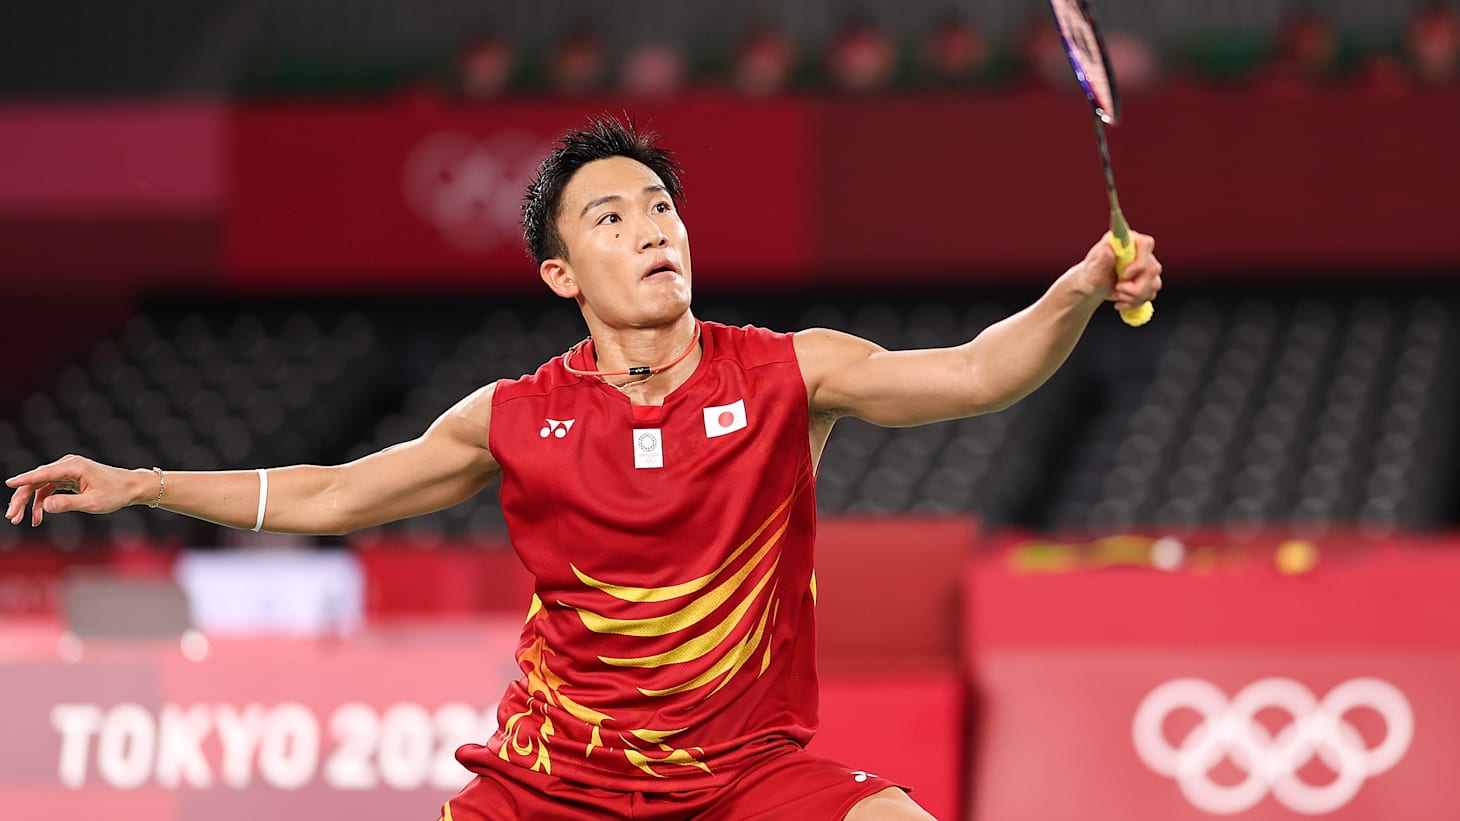 Badminton Asia Championships 2022 Preview, schedule, stars to watch